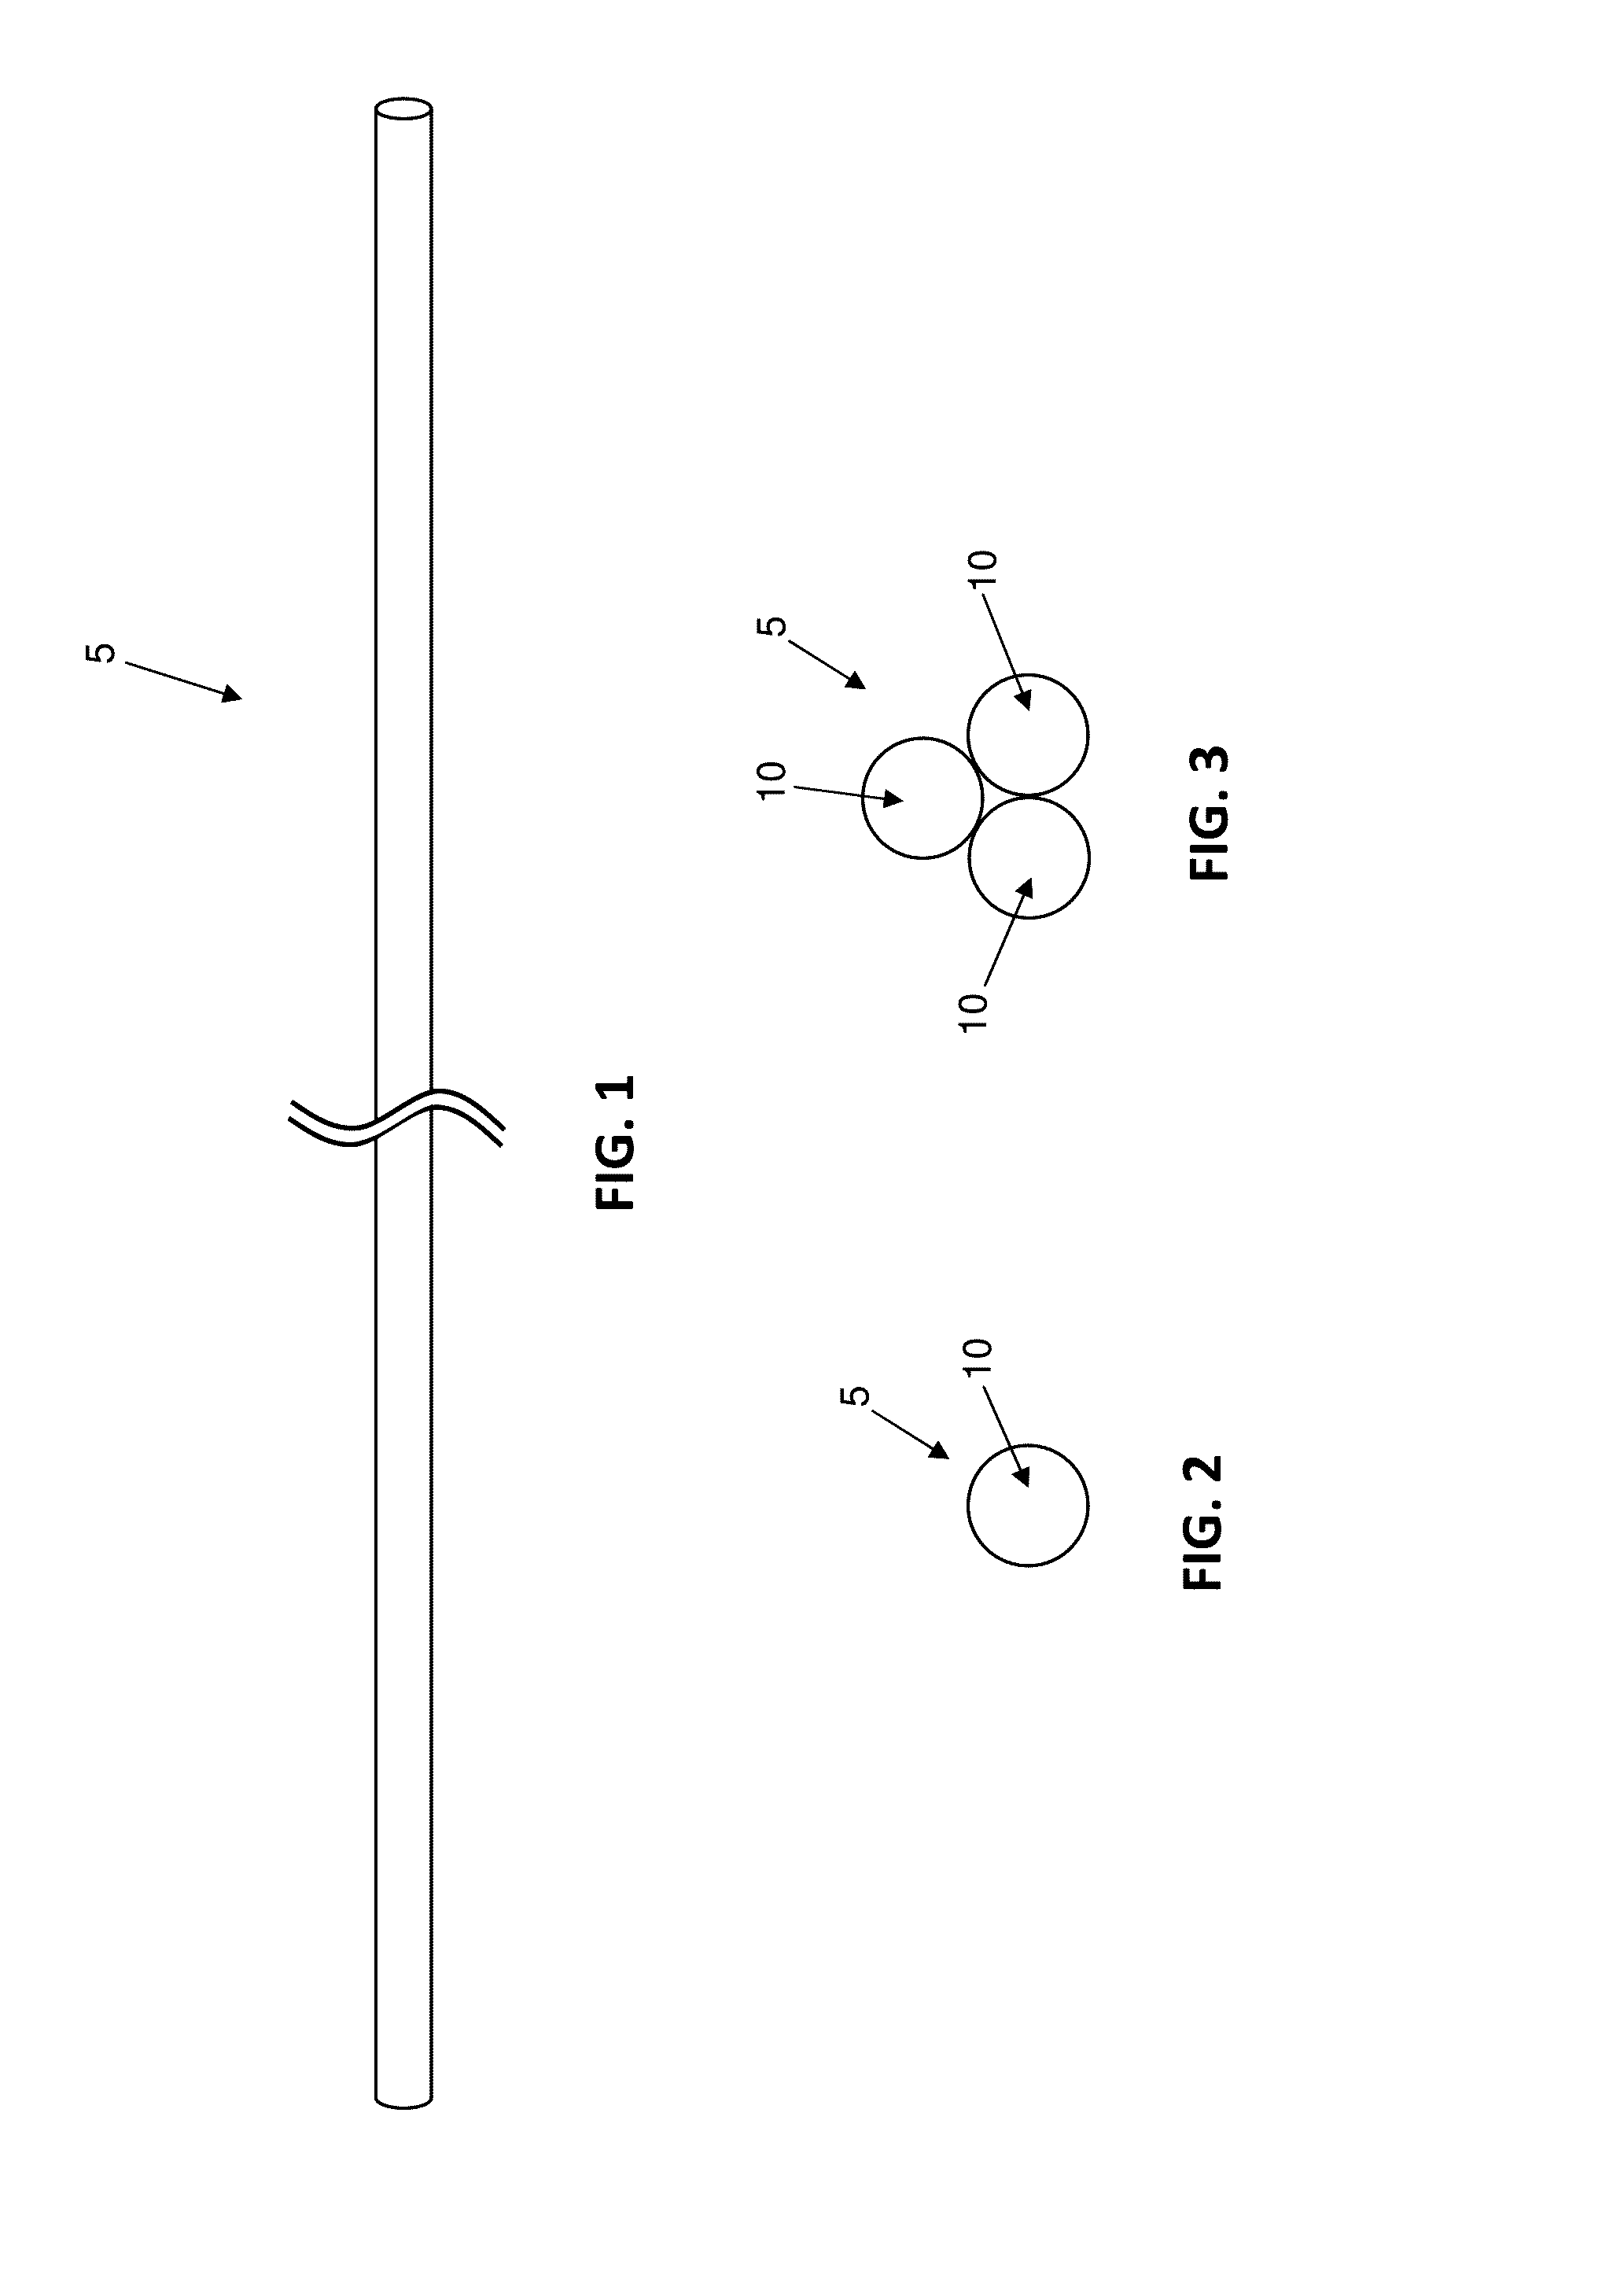 Antimicrobial wound closure materials, including antimicrobial sutures, and method for closing a wound using the same